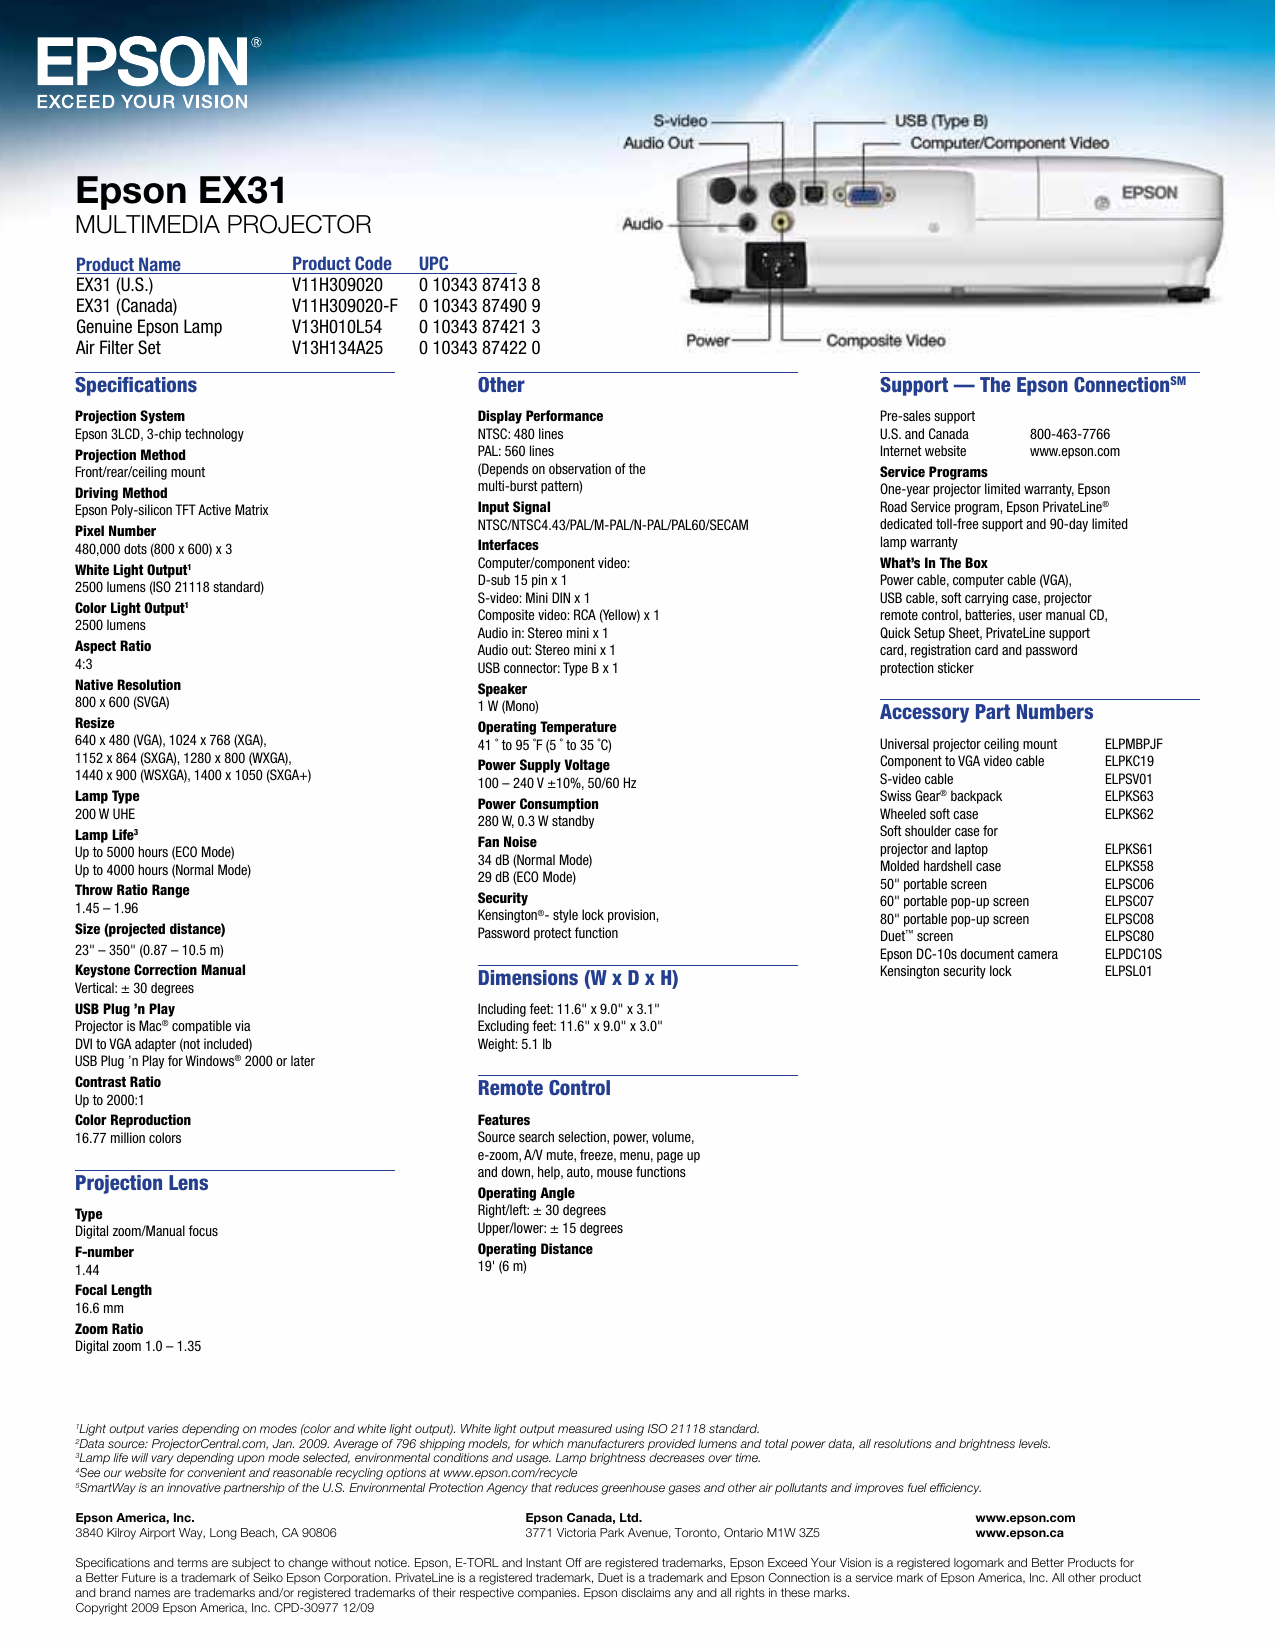 Page 4 of 4 - Epson Epson-Ex31-Multimedia-Projector-Product-Brochure- EX31 - Product Brochure  Epson-ex31-multimedia-projector-product-brochure